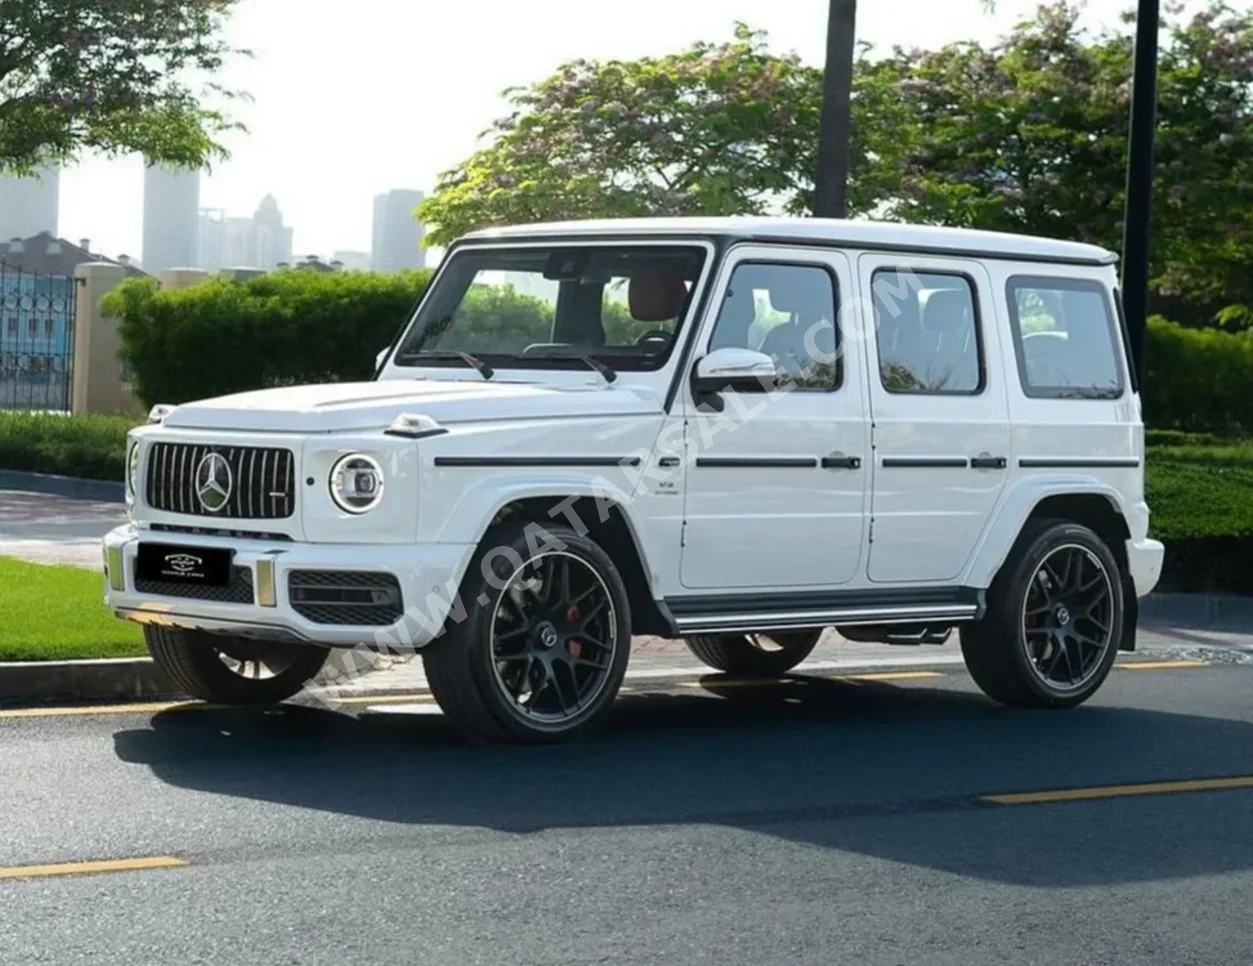 Mercedes-Benz  G-Class  63 AMG  2019  Automatic  31,900 Km  8 Cylinder  Four Wheel Drive (4WD)  SUV  White